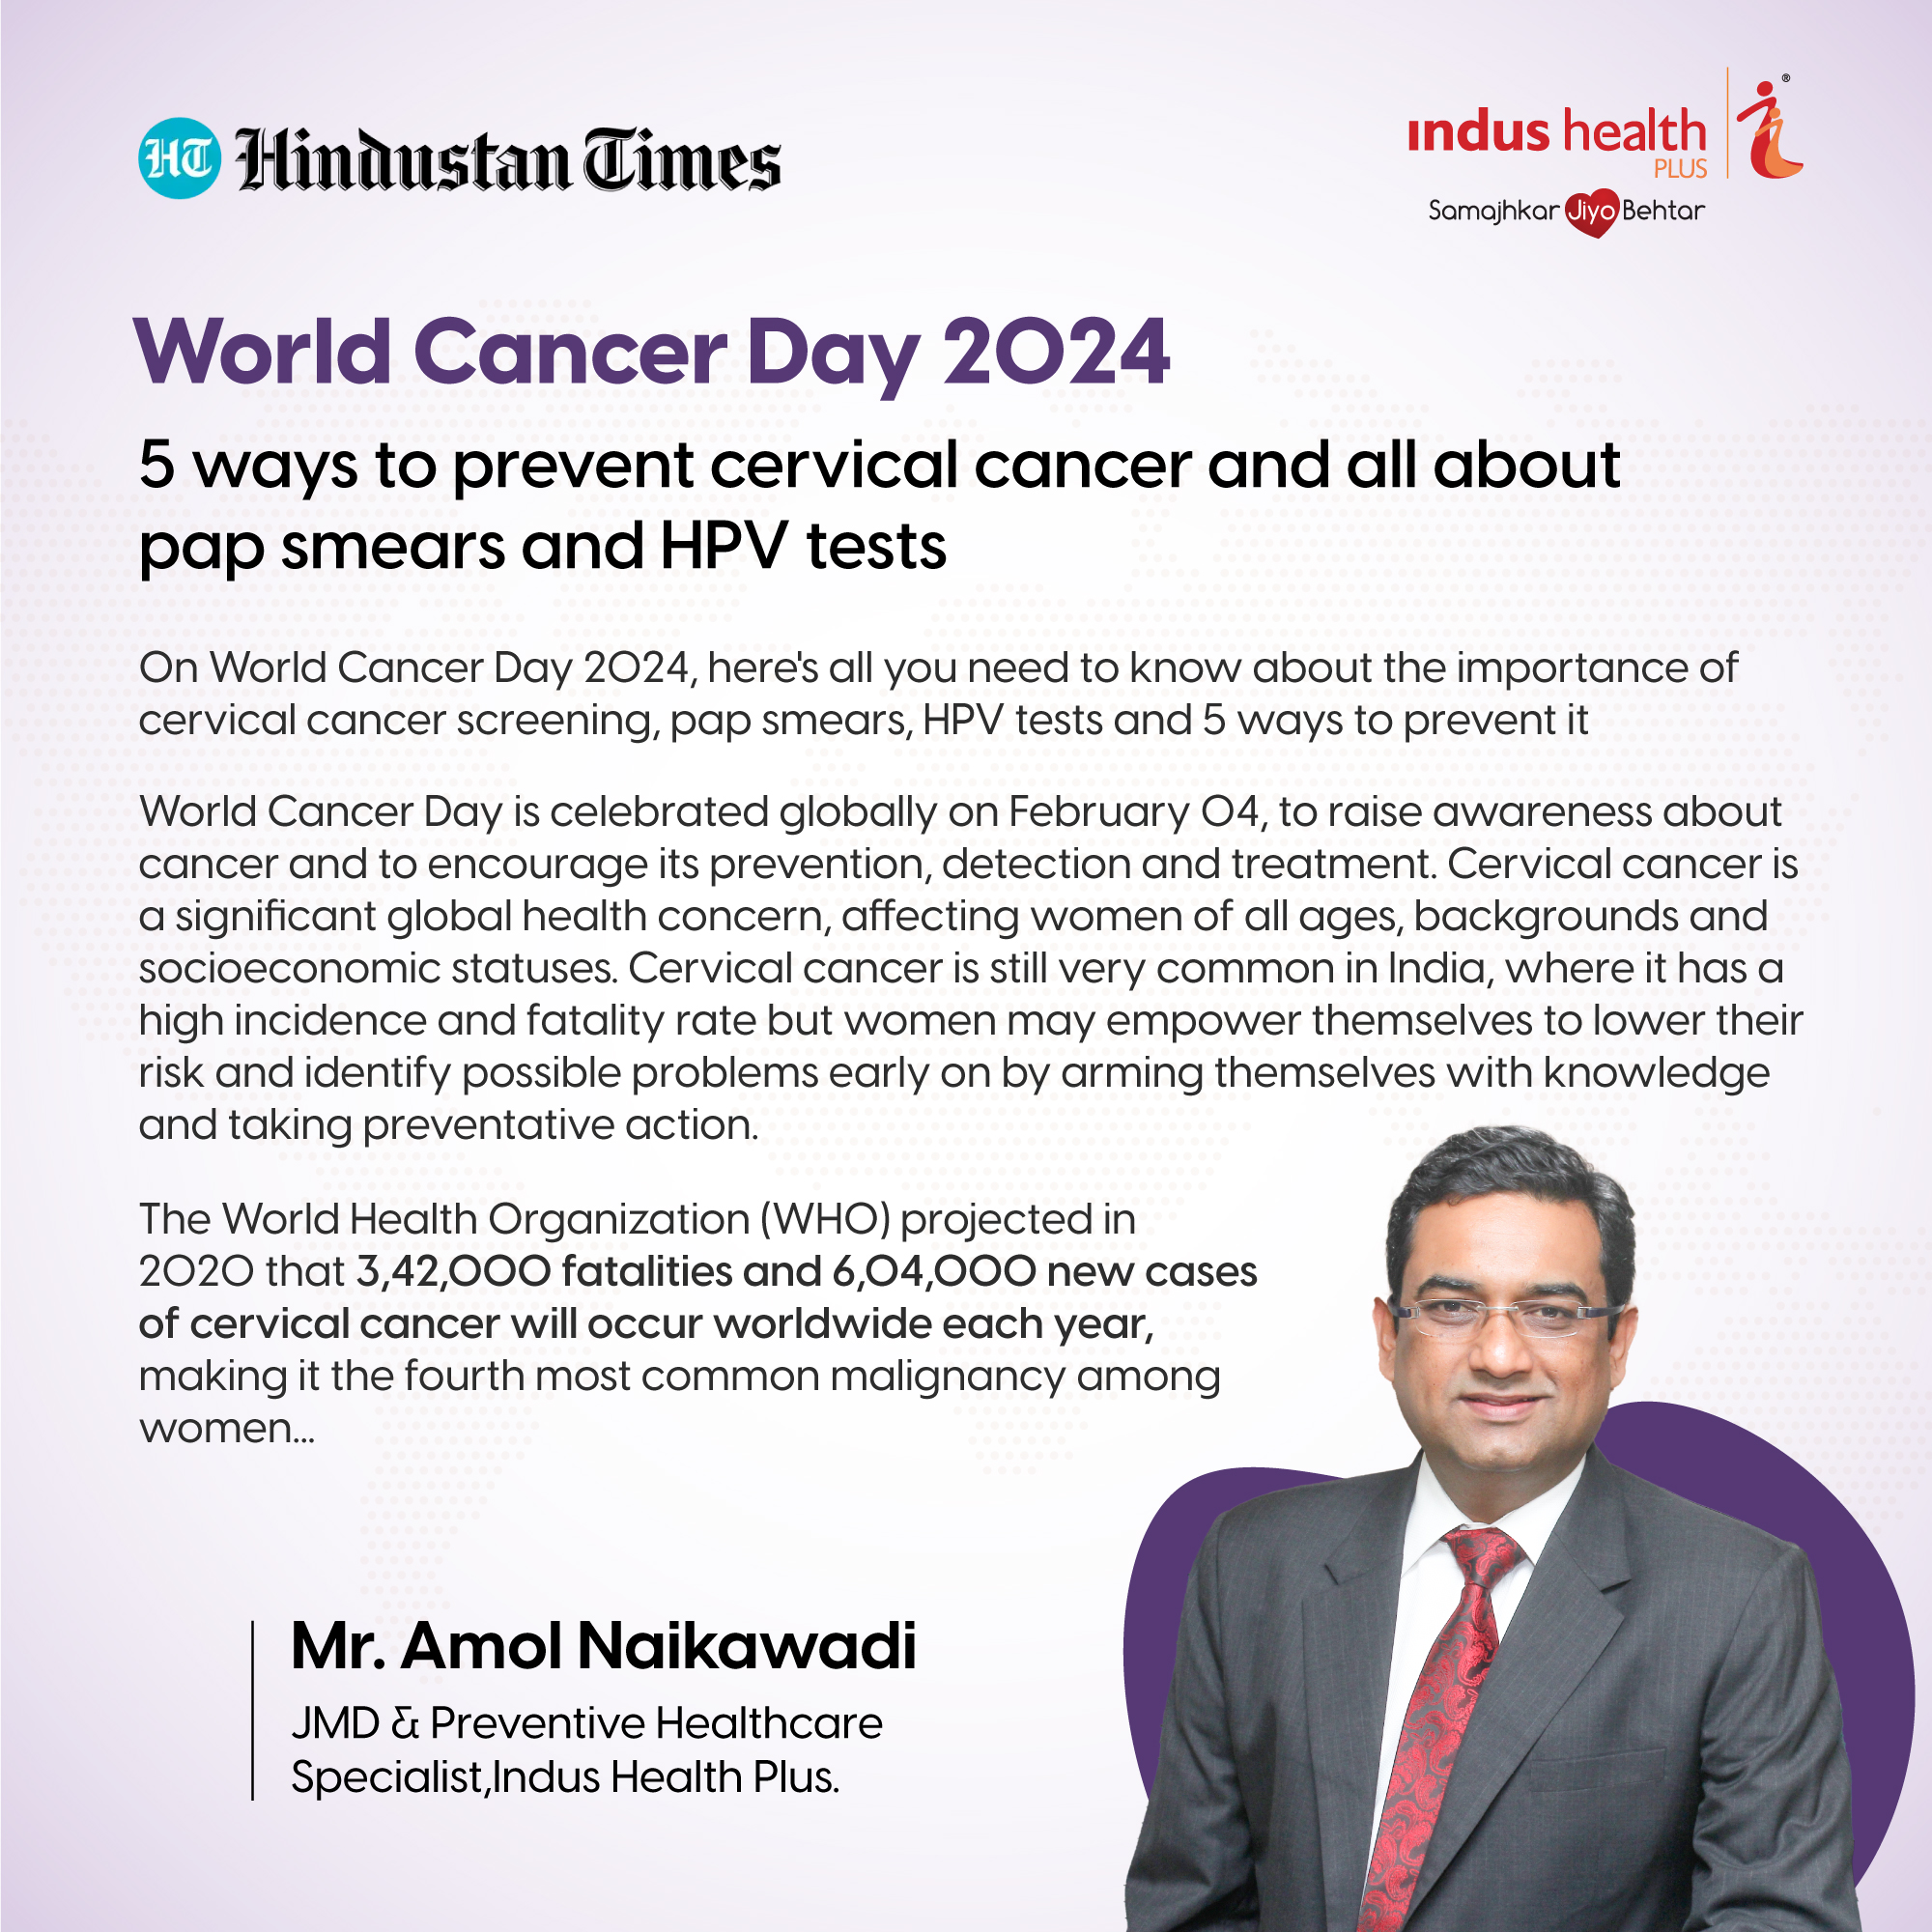 World Cancer Day 2024: 5 ways to prevent cervical cancer and all about pap smears and HPV tests